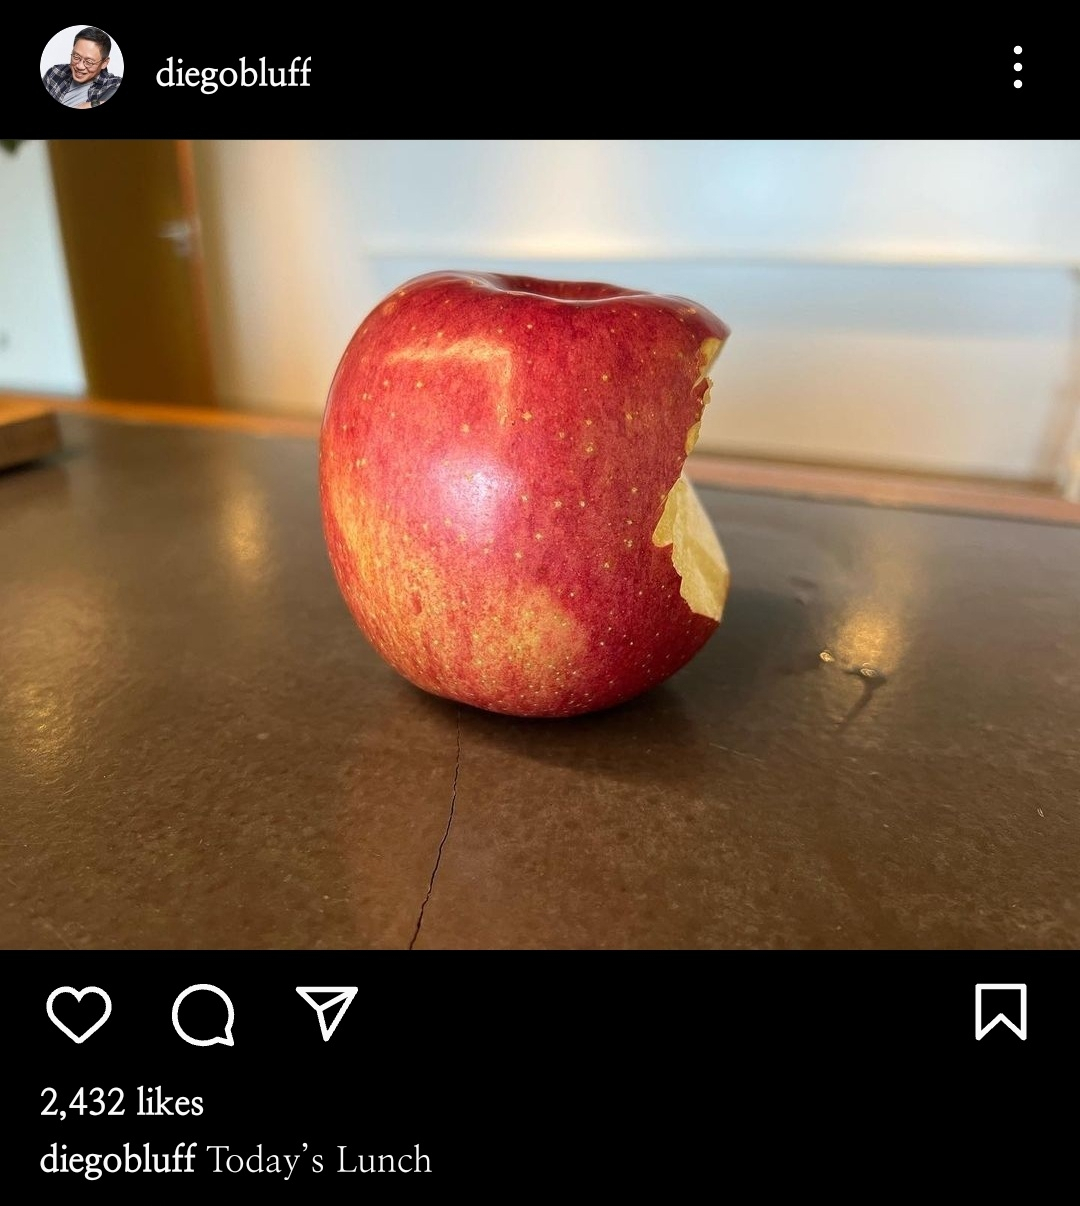 Hyundai Card Vice Chairman Chung Tae-young posts a photo of a bitten apple on Feb. 3 on Instagram in a not-so-veiled reference to the Apple Pay launch. (Hyundai Card Vice Chairman Chung Tae-young's Instagram)